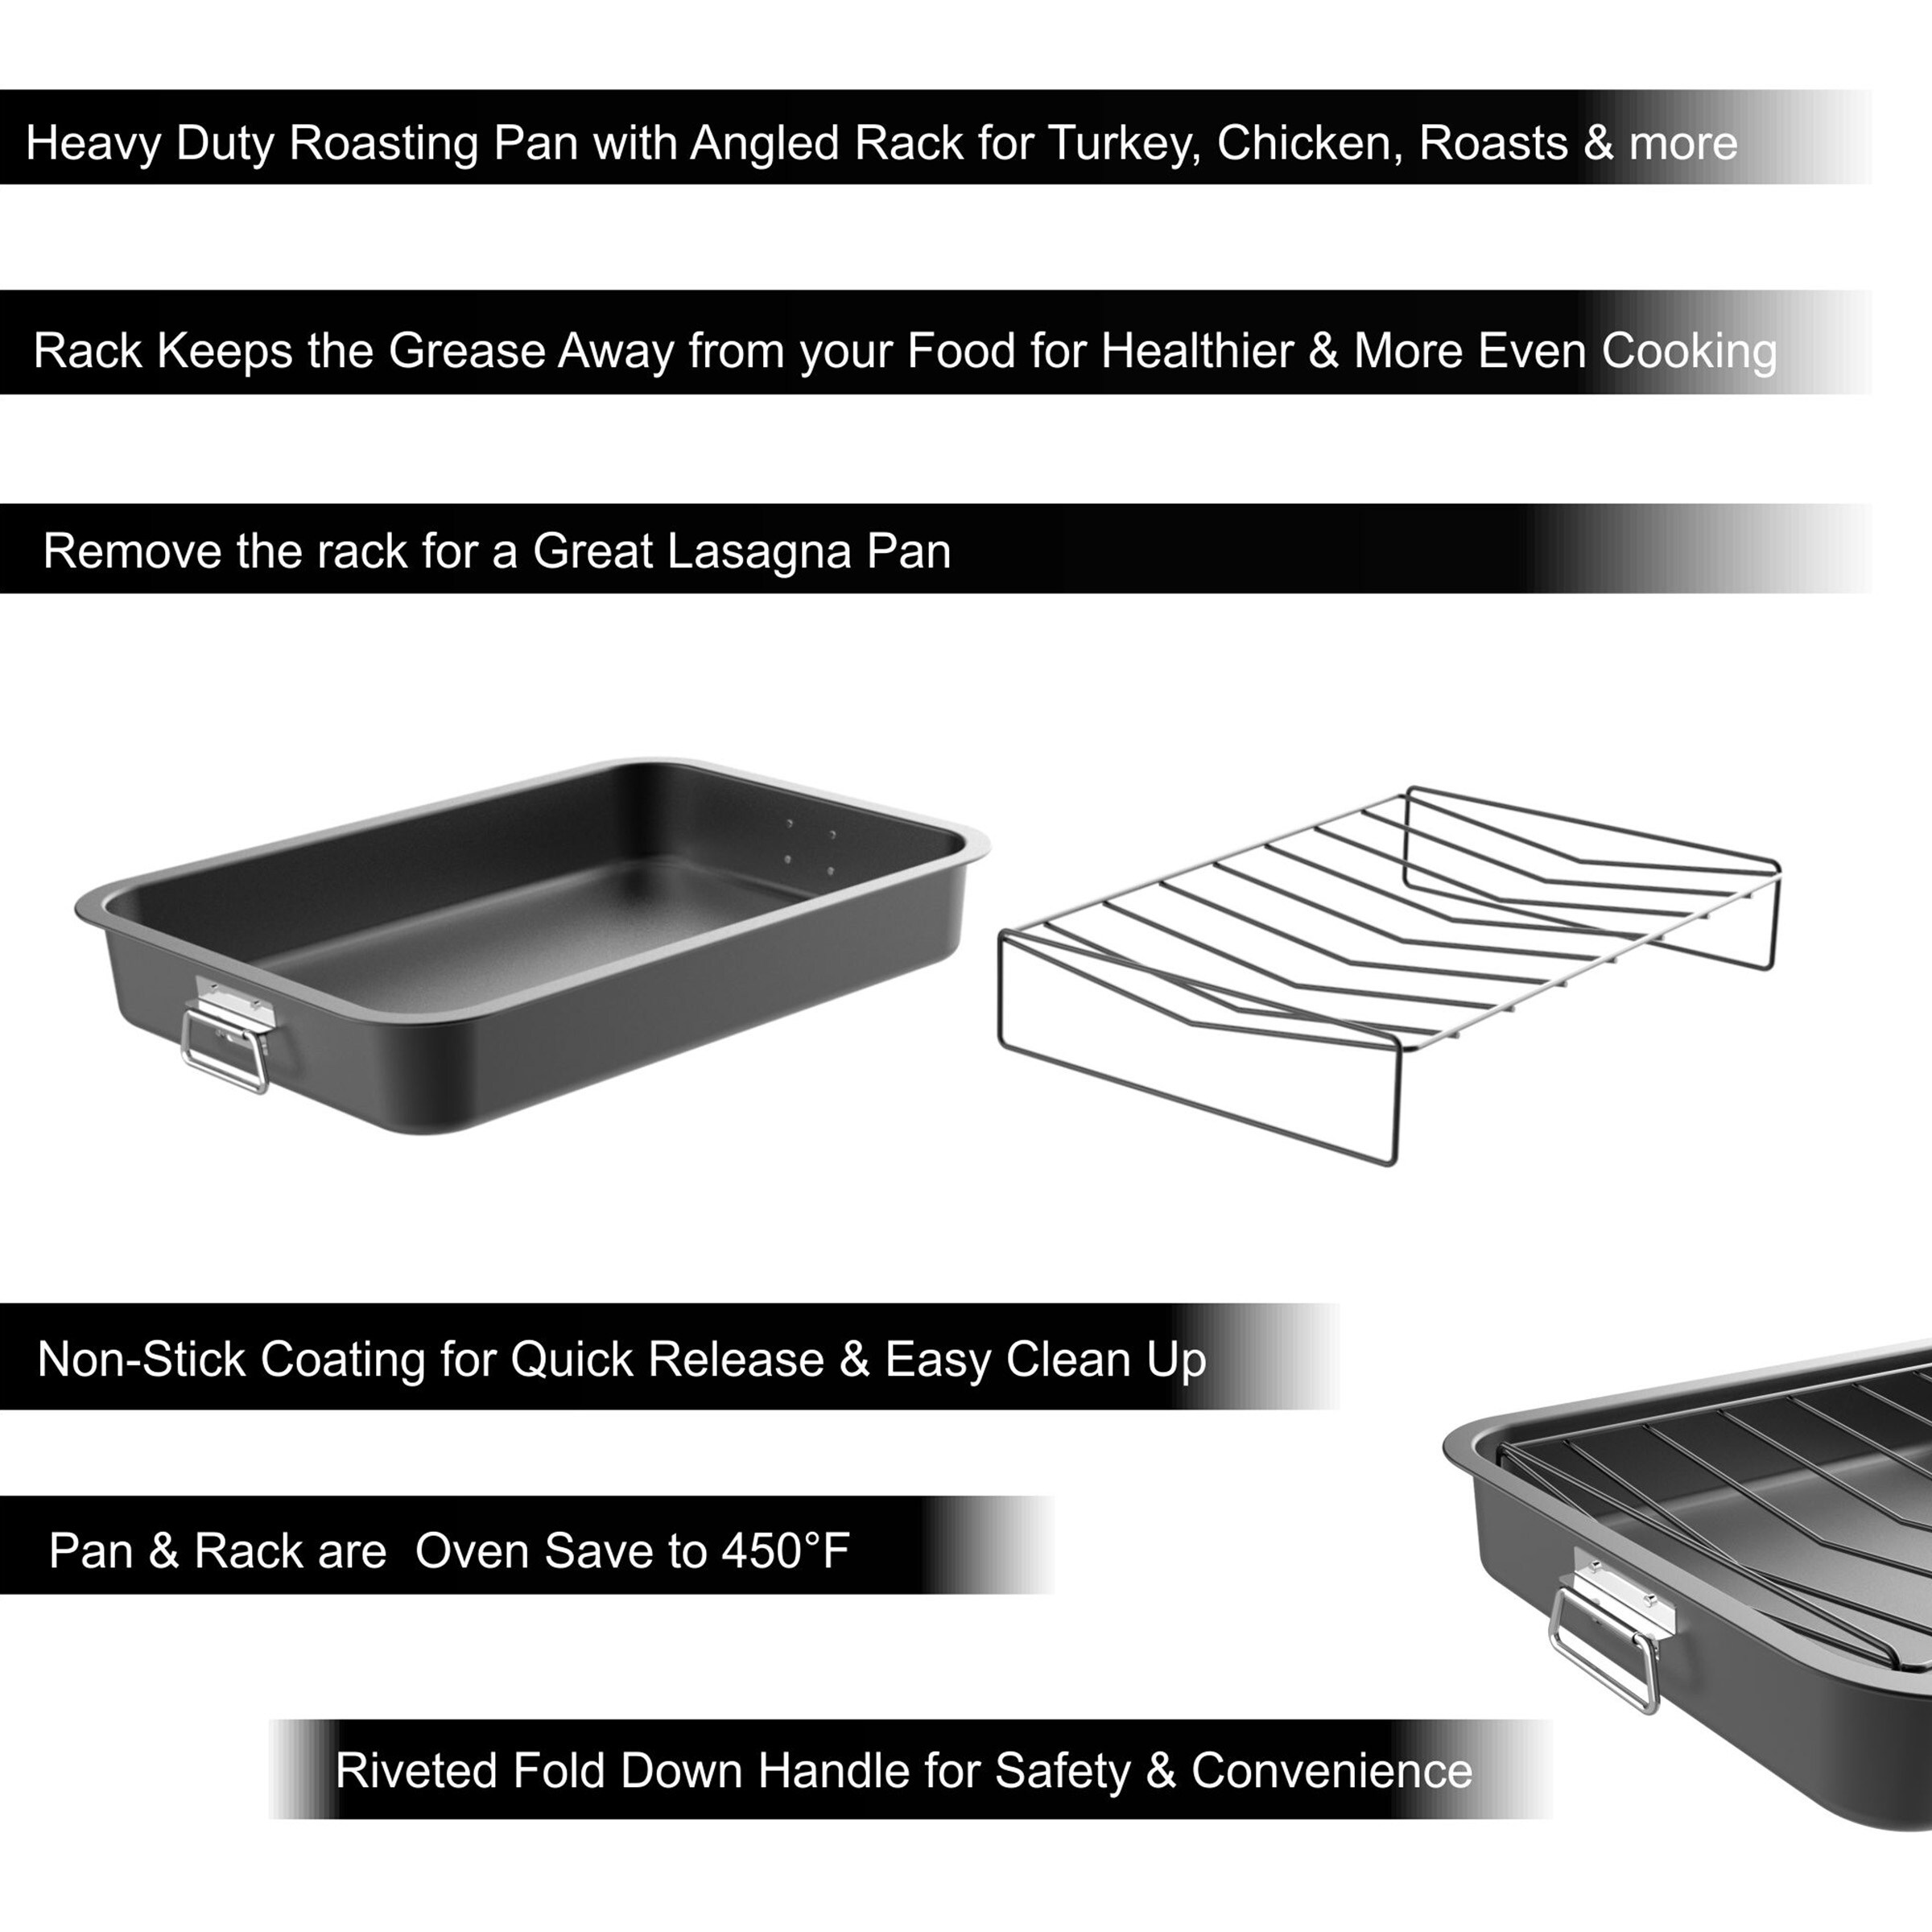 https://ak1.ostkcdn.com/images/products/26050121/Roasting-Pan-with-Angled-Rack-Nonstick-Oven-Roaster-by-Classic-Cuisine-c4a84526-76cb-4a7a-a8d6-4f44de3ad024.jpg